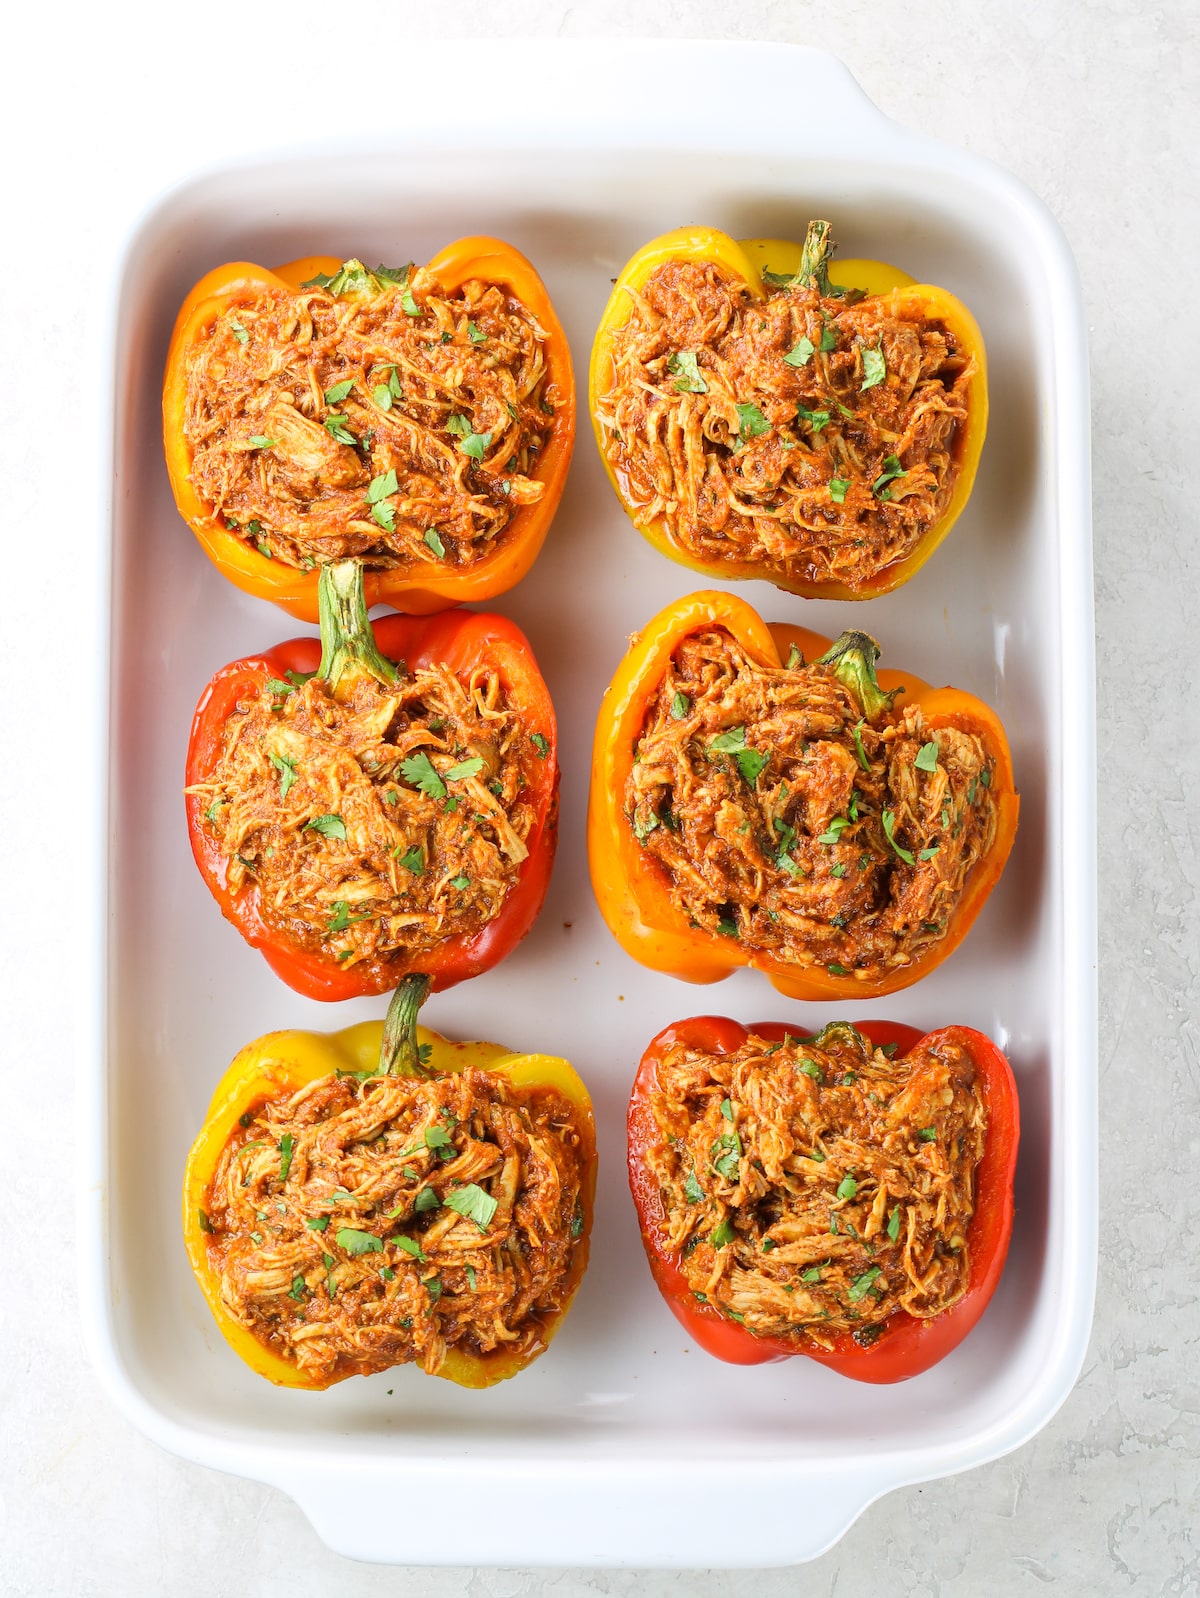 A casserole dish of 6 stuffed peppers with zesty shredded chicken.